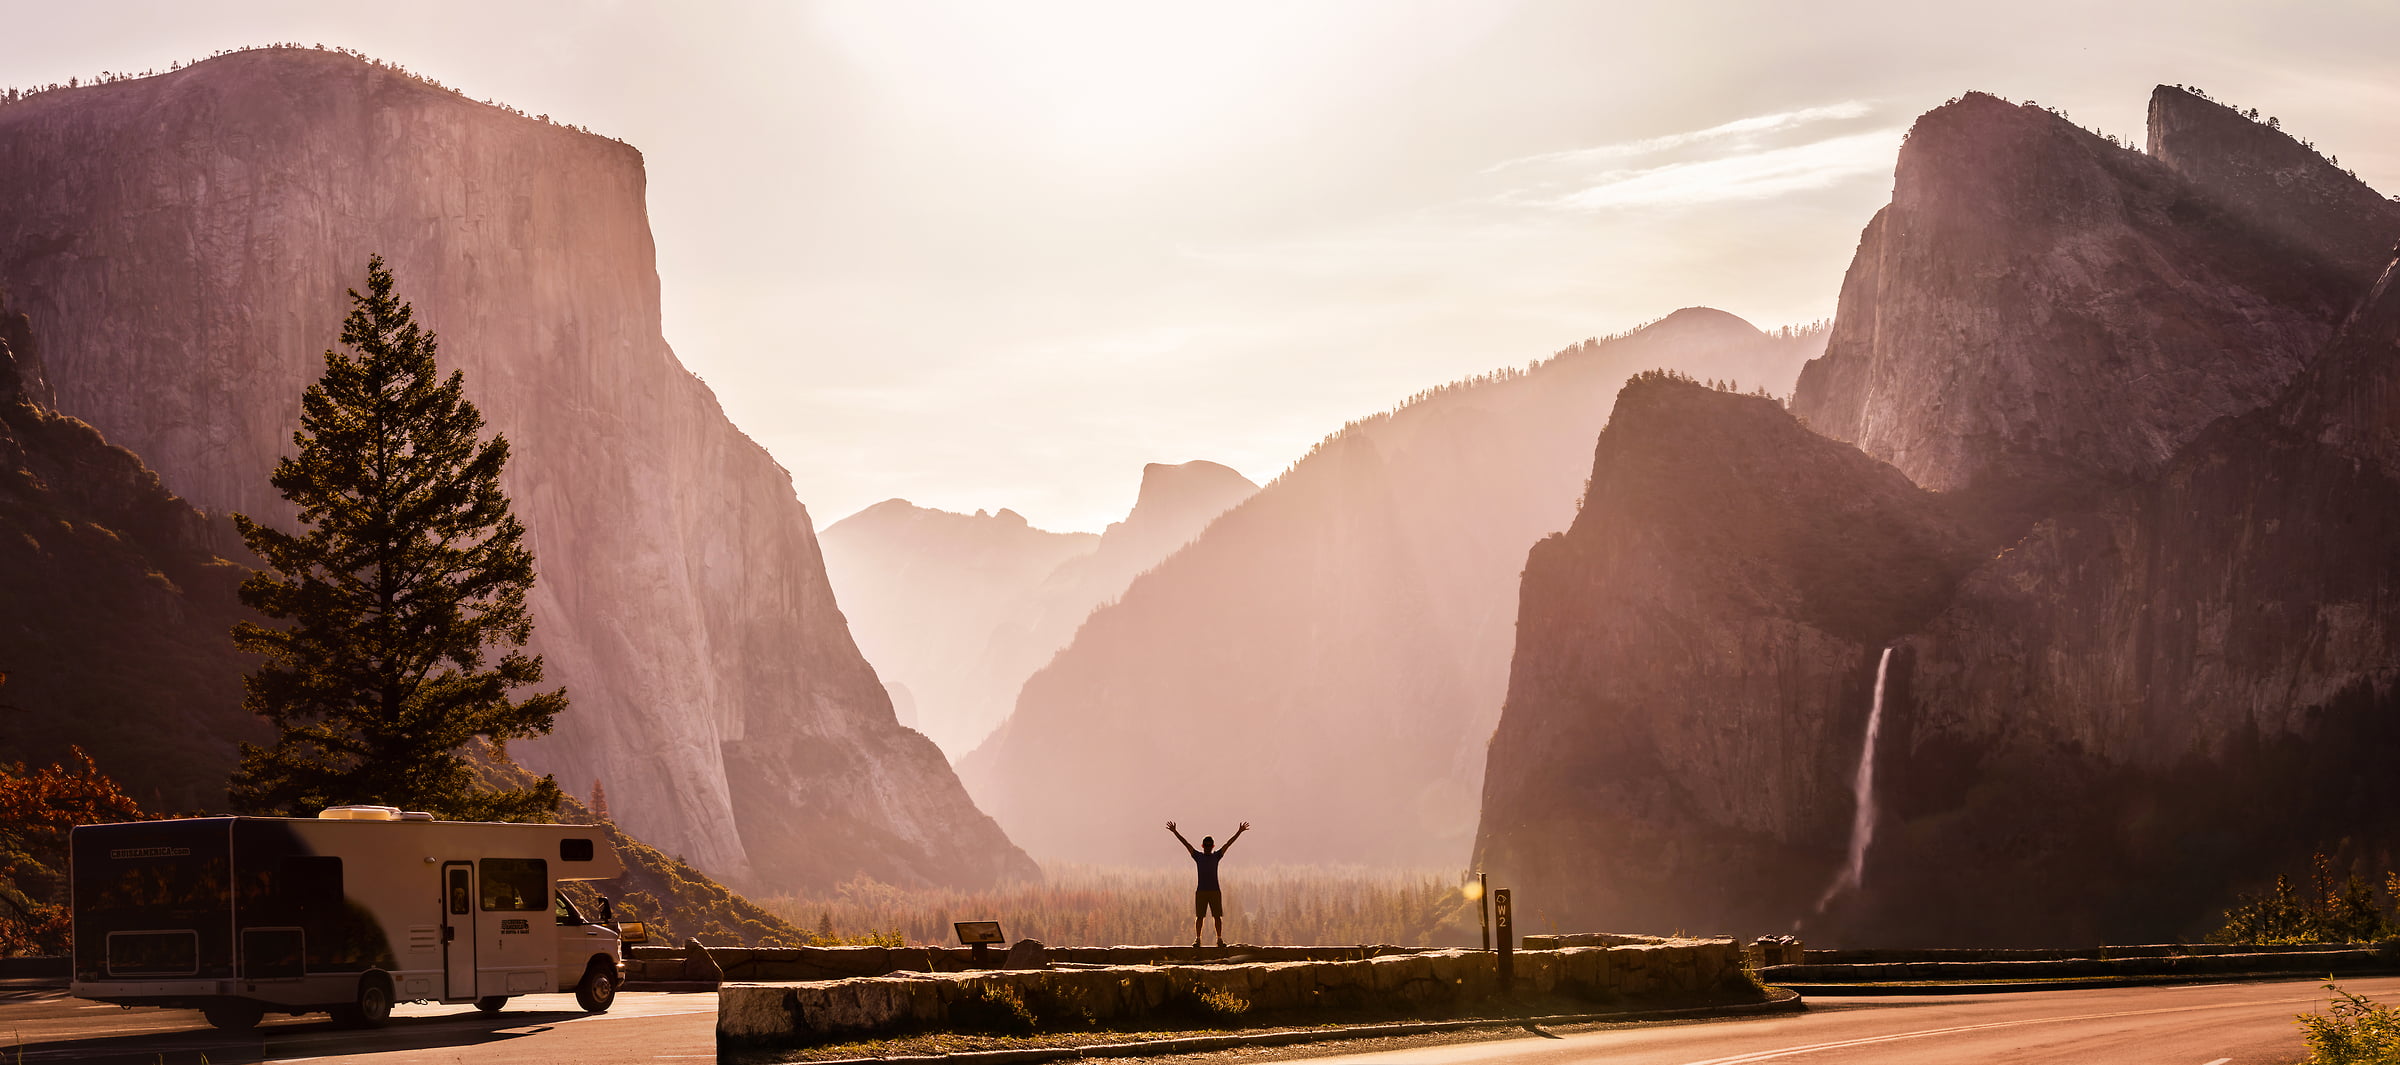 138 megapixels! A very high definition inspirational VAST photo of a joyful man in nature among mountains and waterfalls; created by Dan Piech in the valley of Yosemite National Park